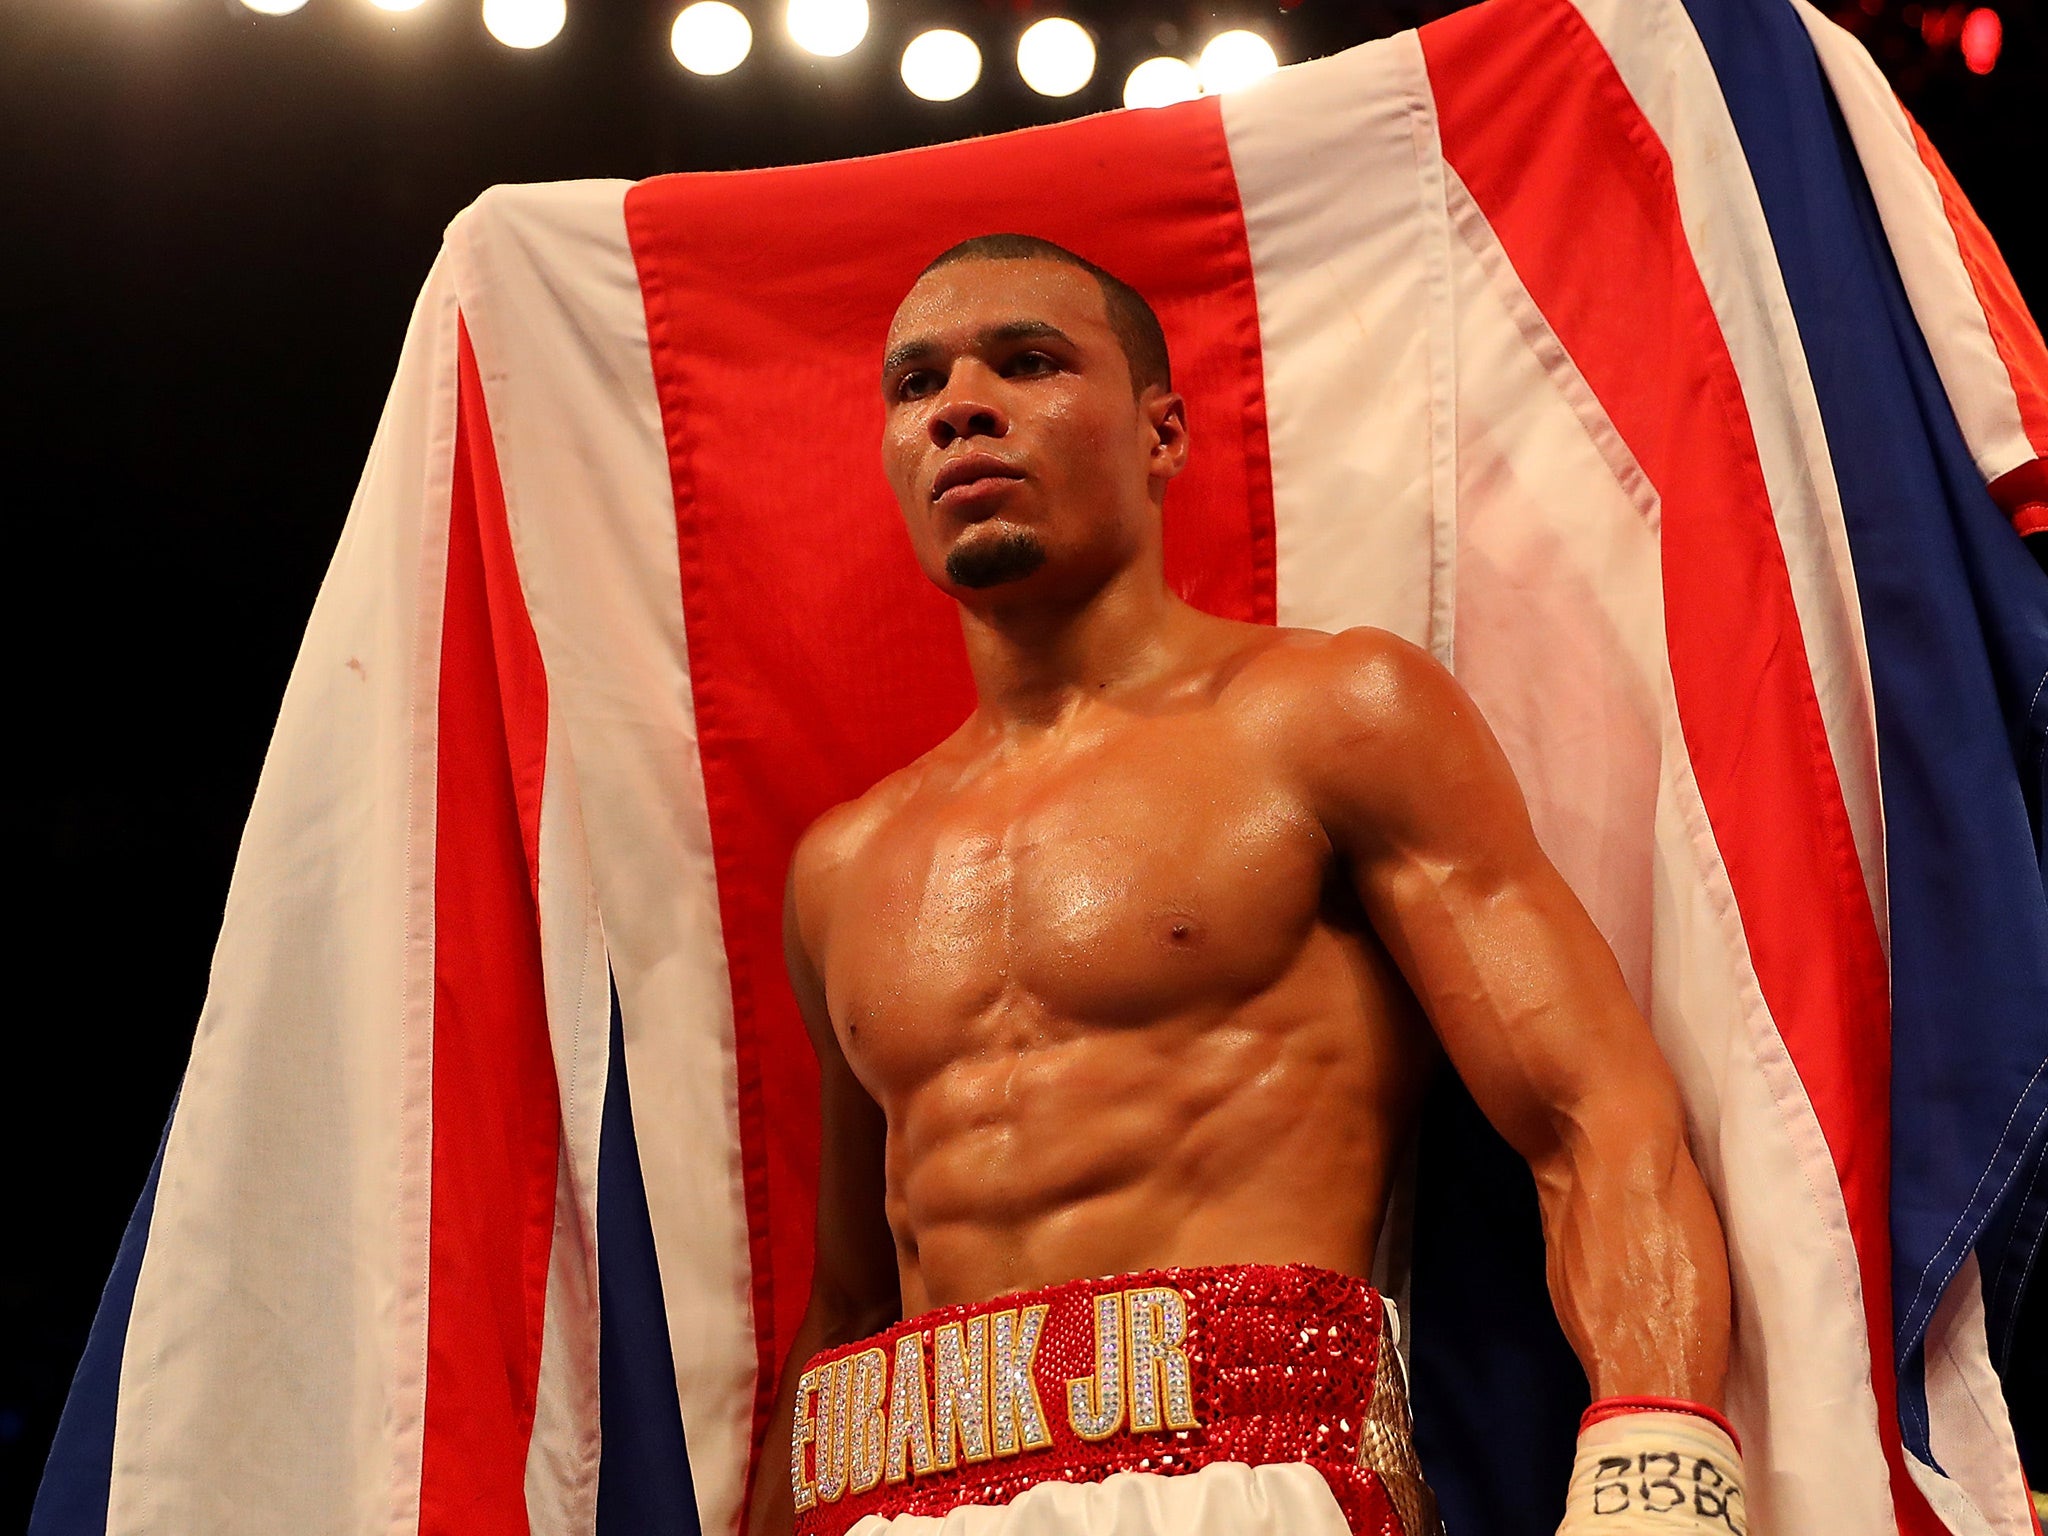 Chris Eubank Jr is ready for his pay-per-view bout with Renold Quinlan - but fans should switch off